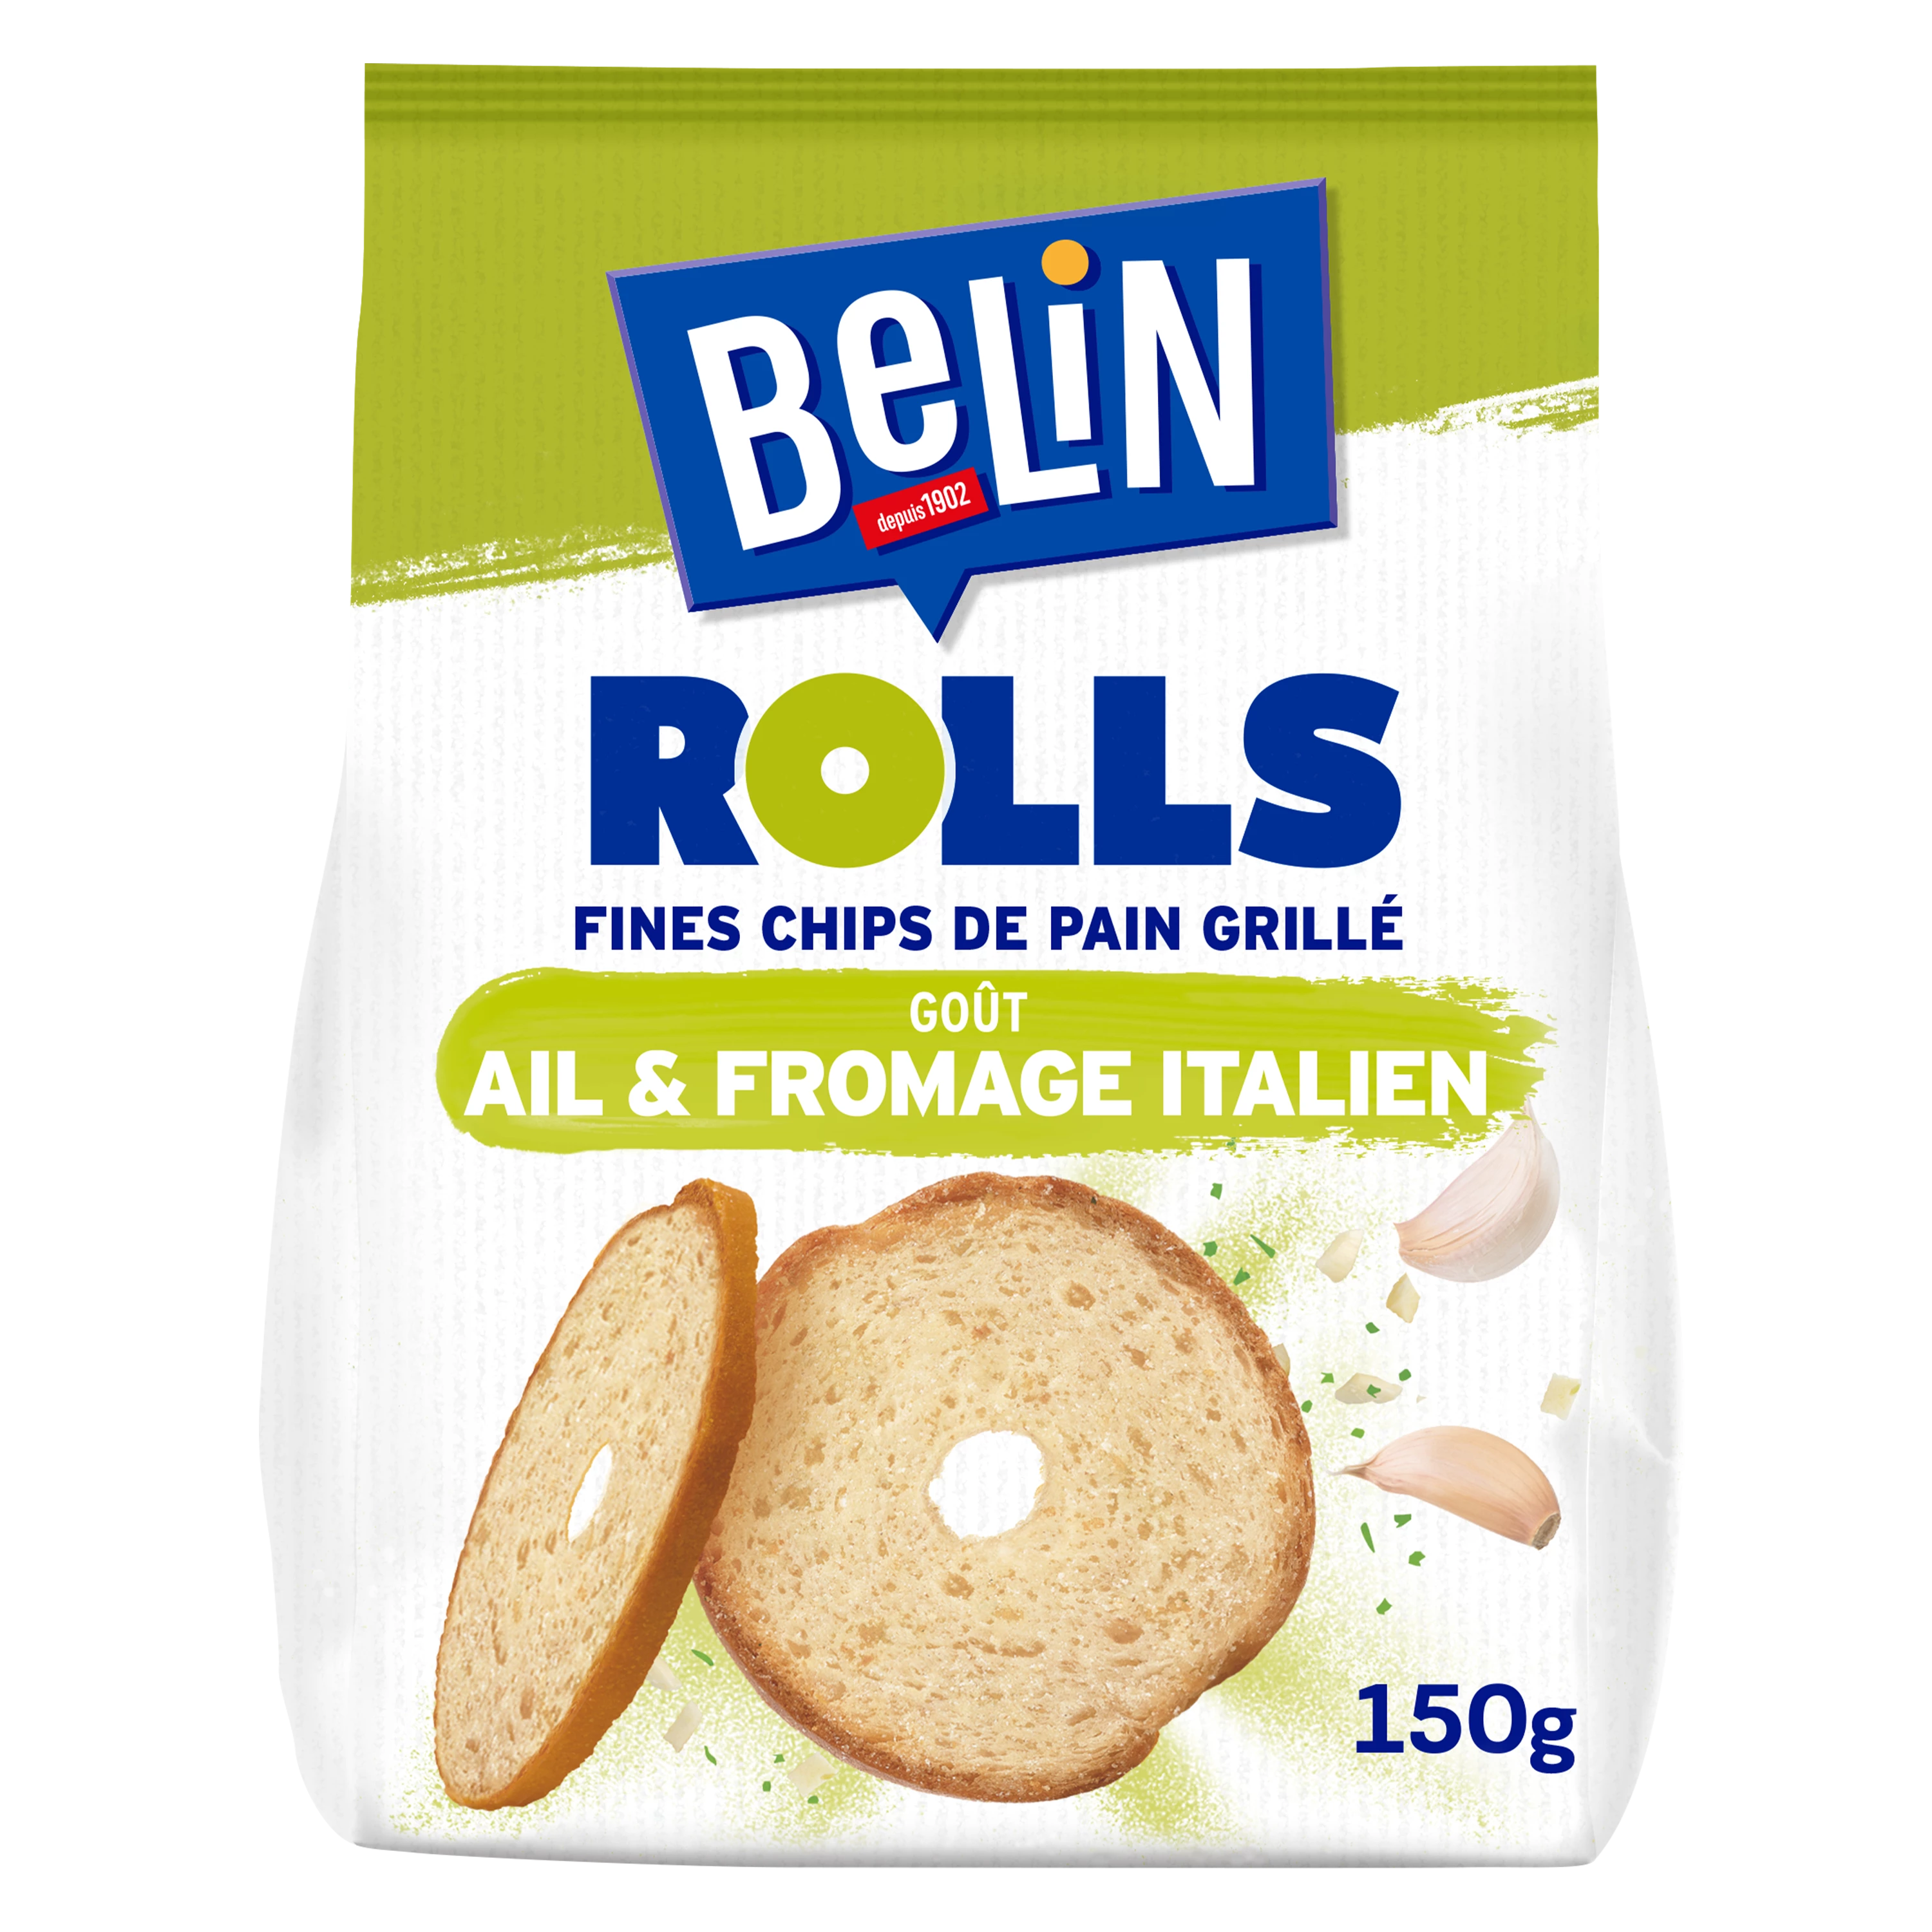 Thin Toasted Bread Chips Rolls Garlic and Italian Cheese Flavor, 150g - BERLIN